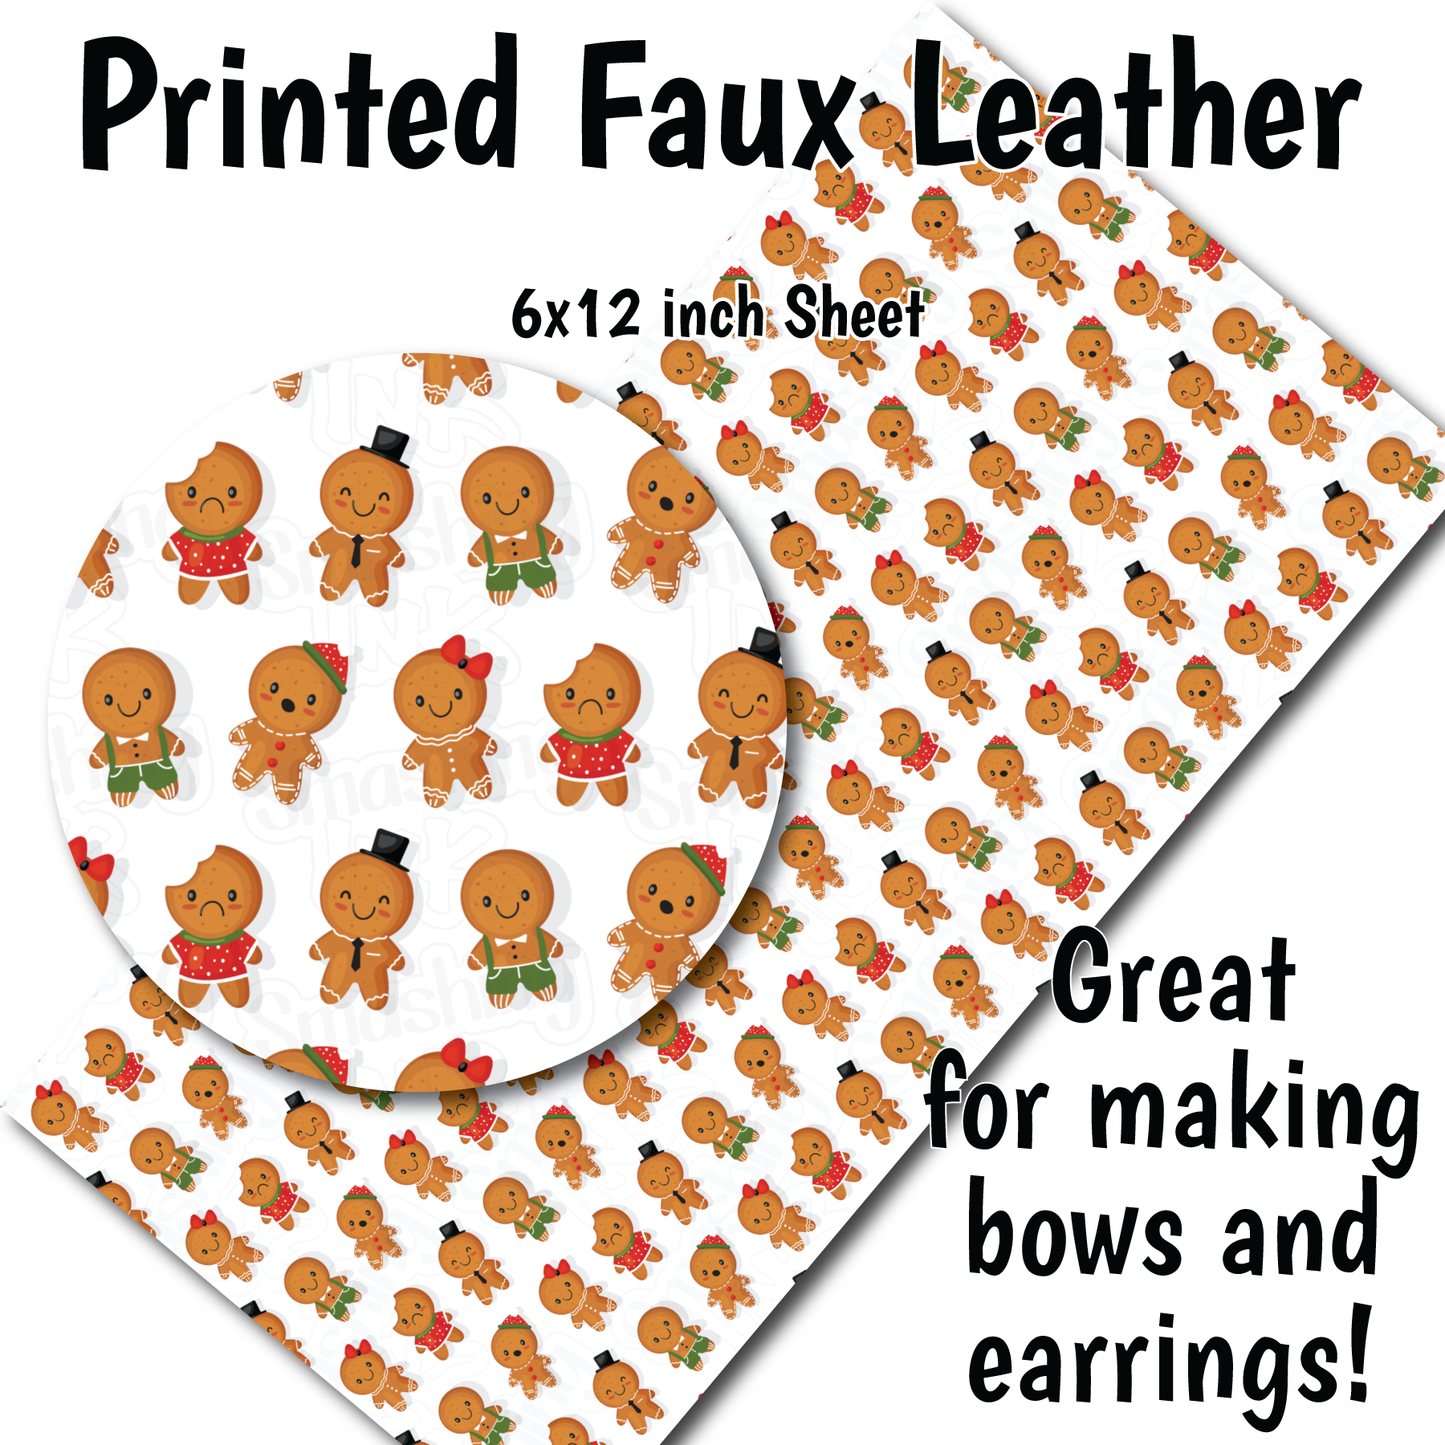 Gingerbread Cookies N - Faux Leather Sheet (SHIPS IN 3 BUS DAYS)